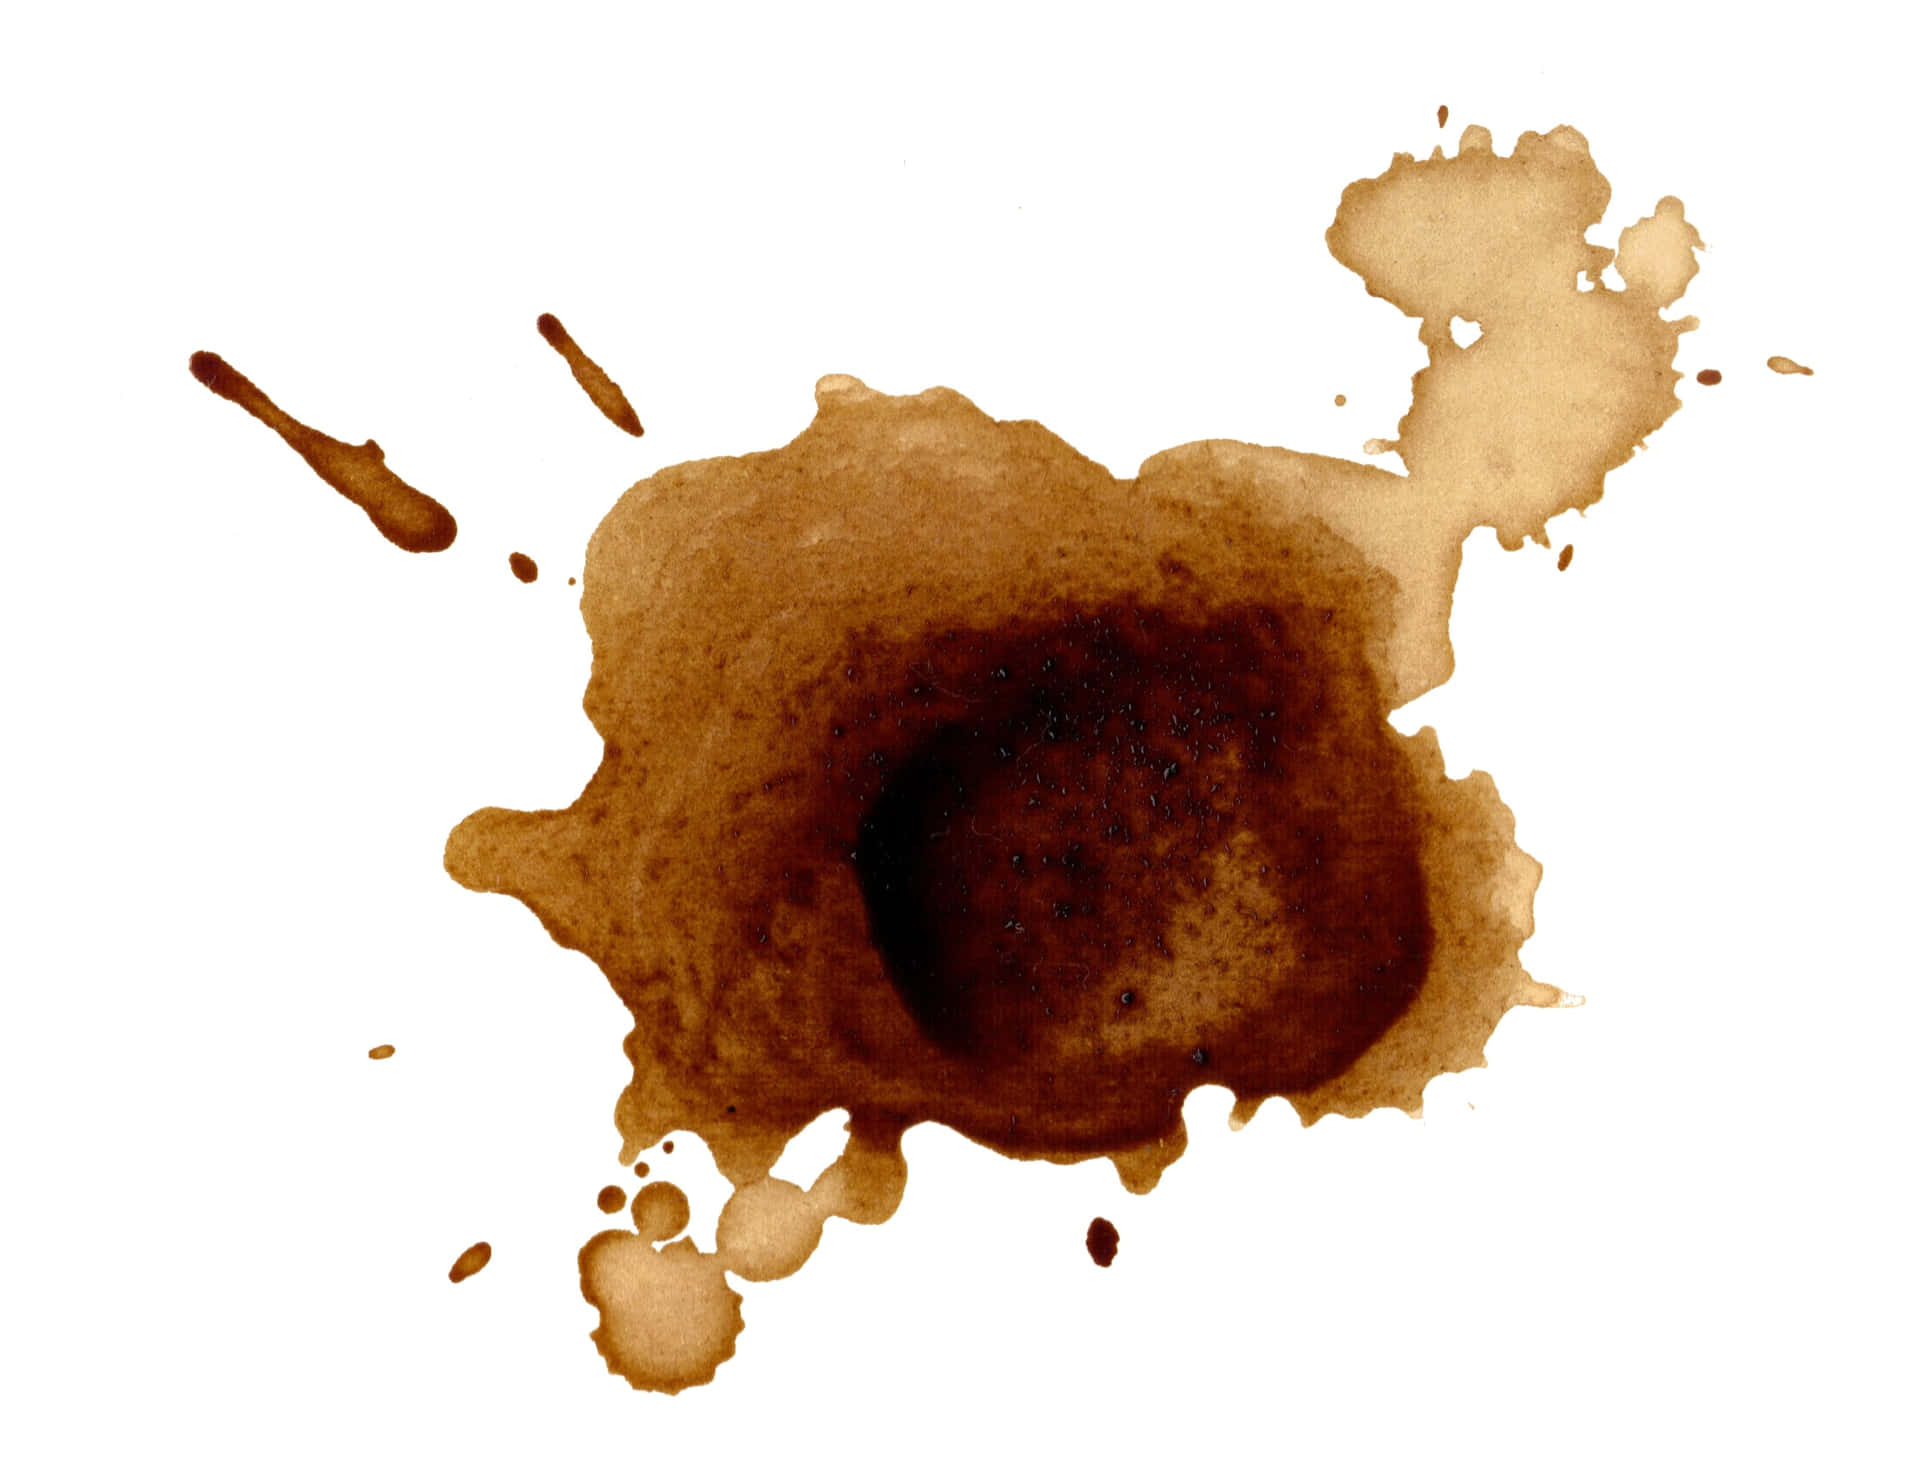 Fortuitous Coffee Spill Scatter Wallpaper